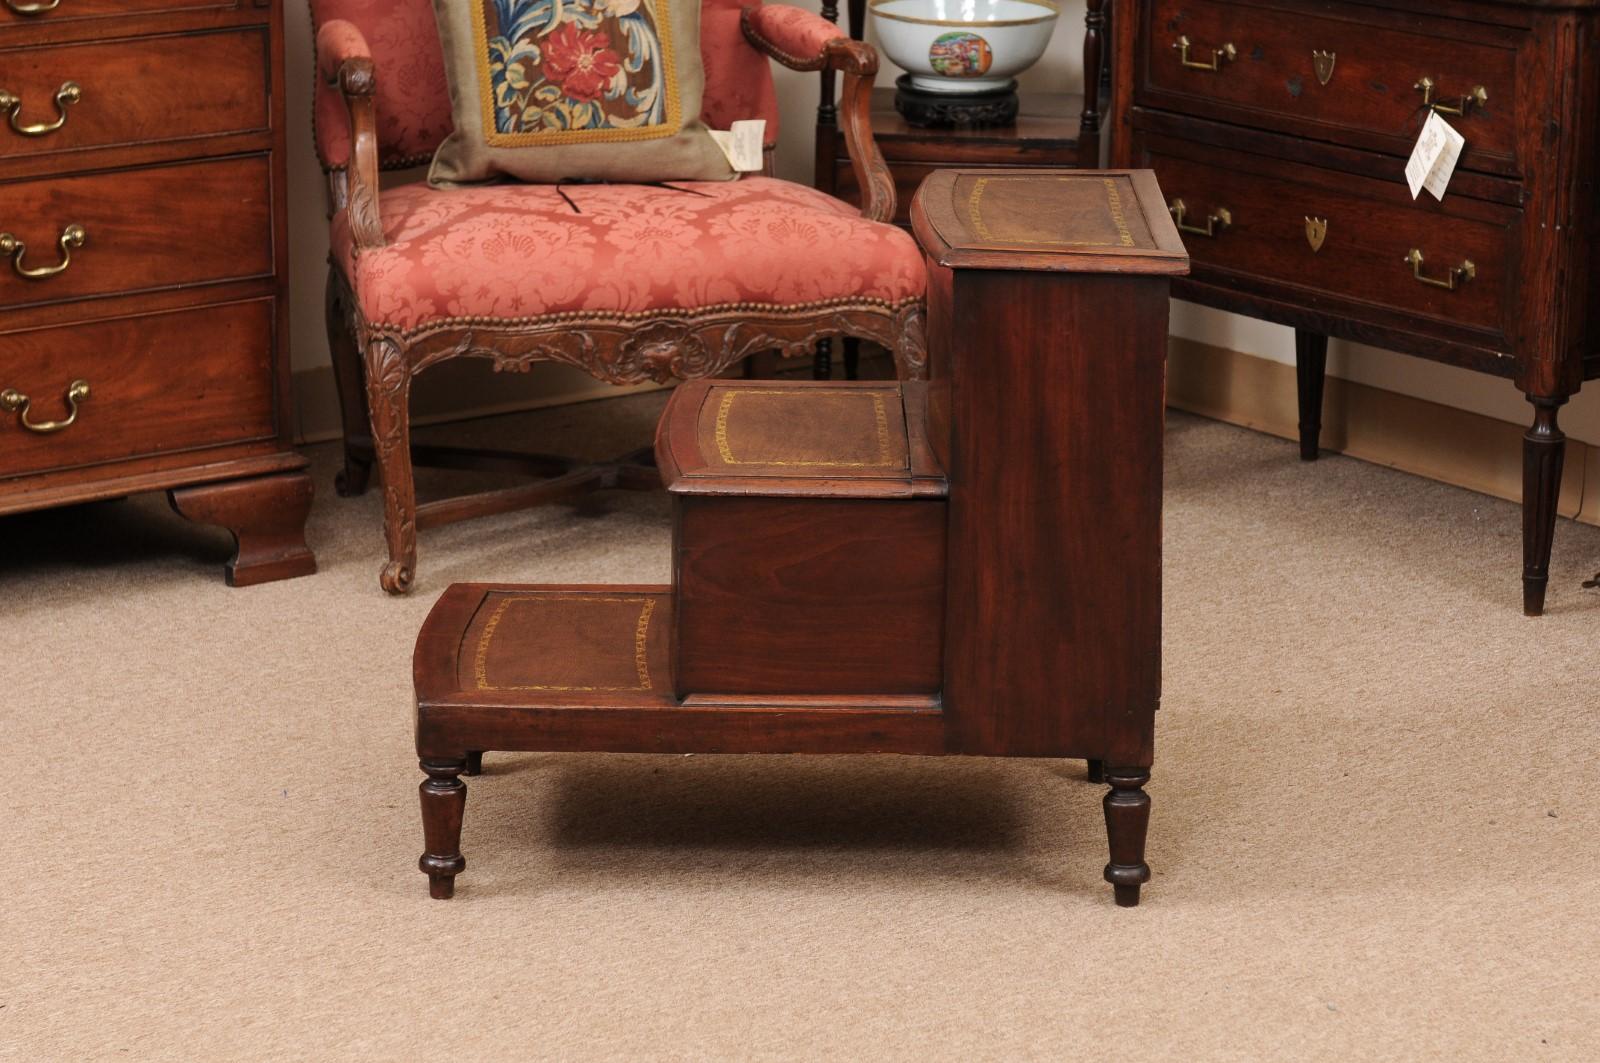  19th Century English Regency Library Steps in Mahogany with Embossed Leather In Good Condition For Sale In Atlanta, GA